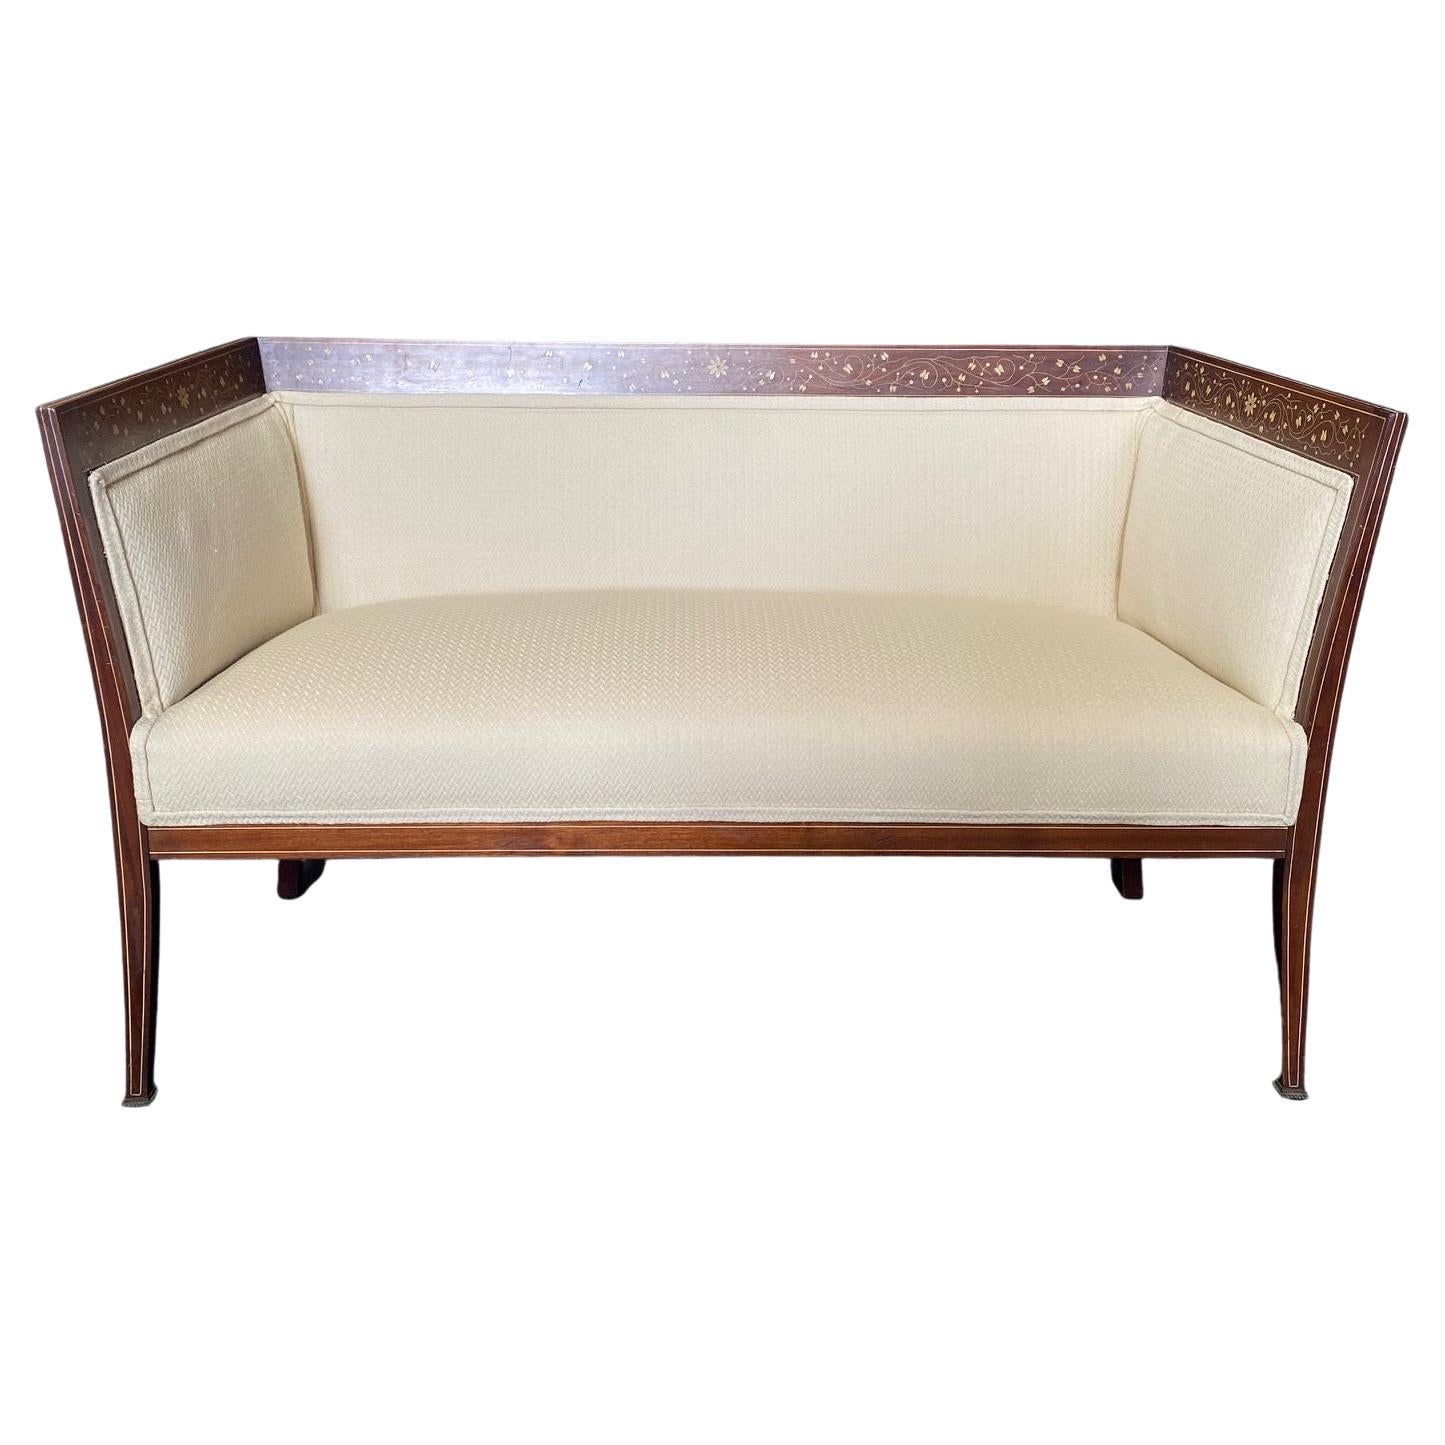  Midcentury Neoclassical Italian Loveseat with Exquisite Inlay For Sale